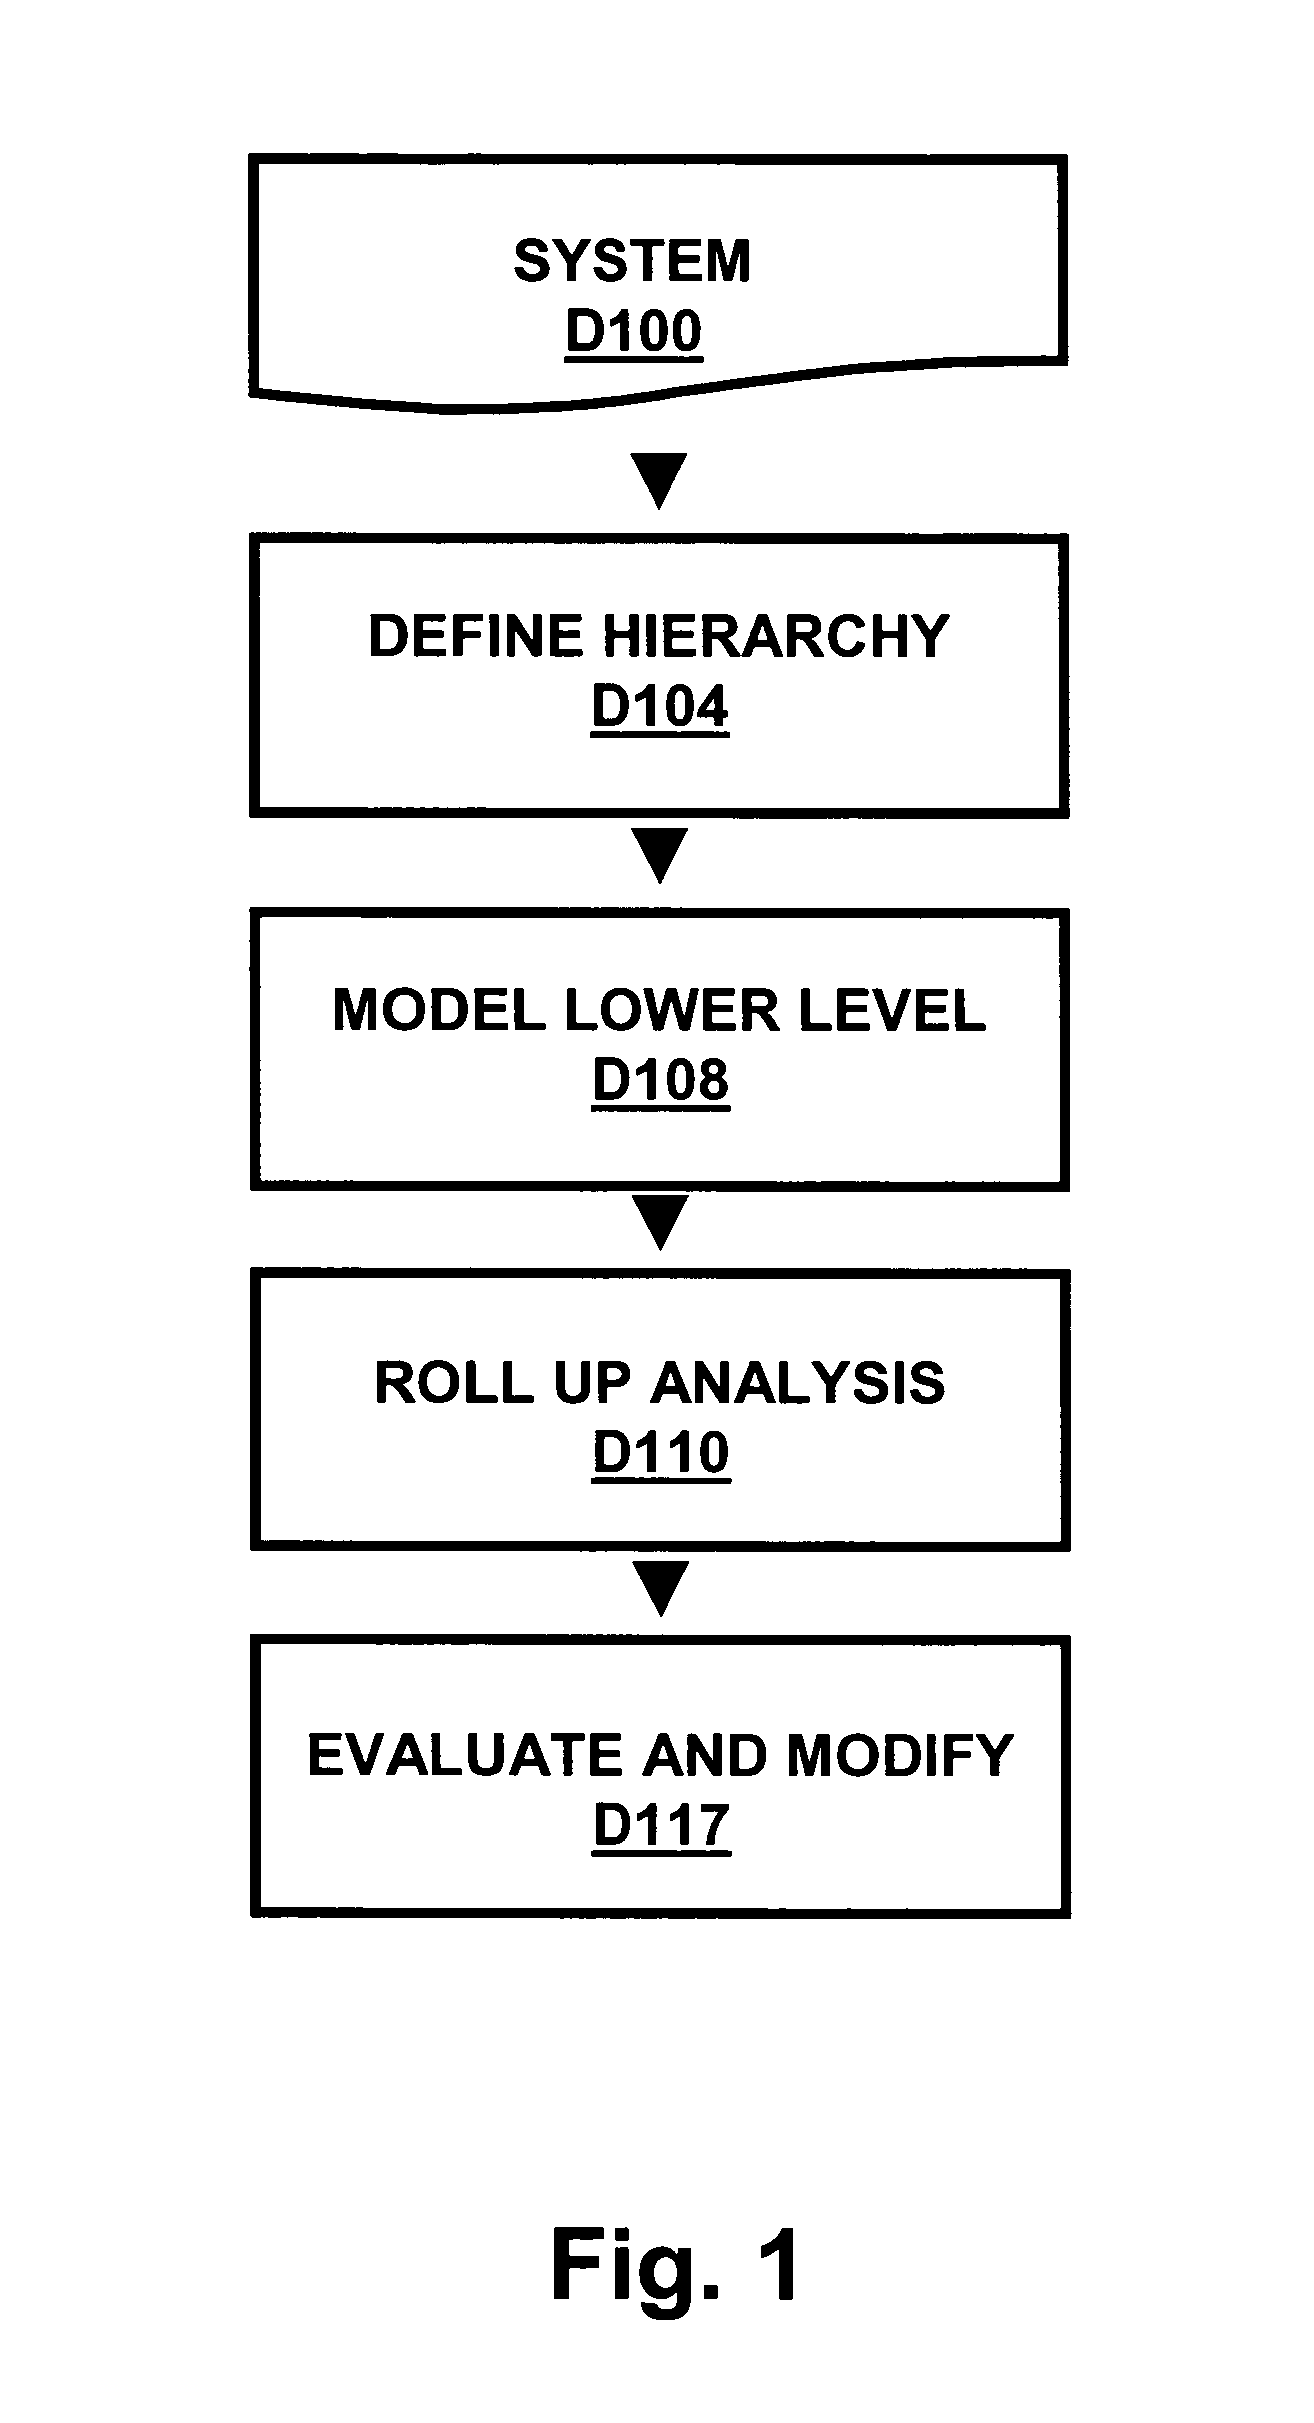 Hierarchical system design